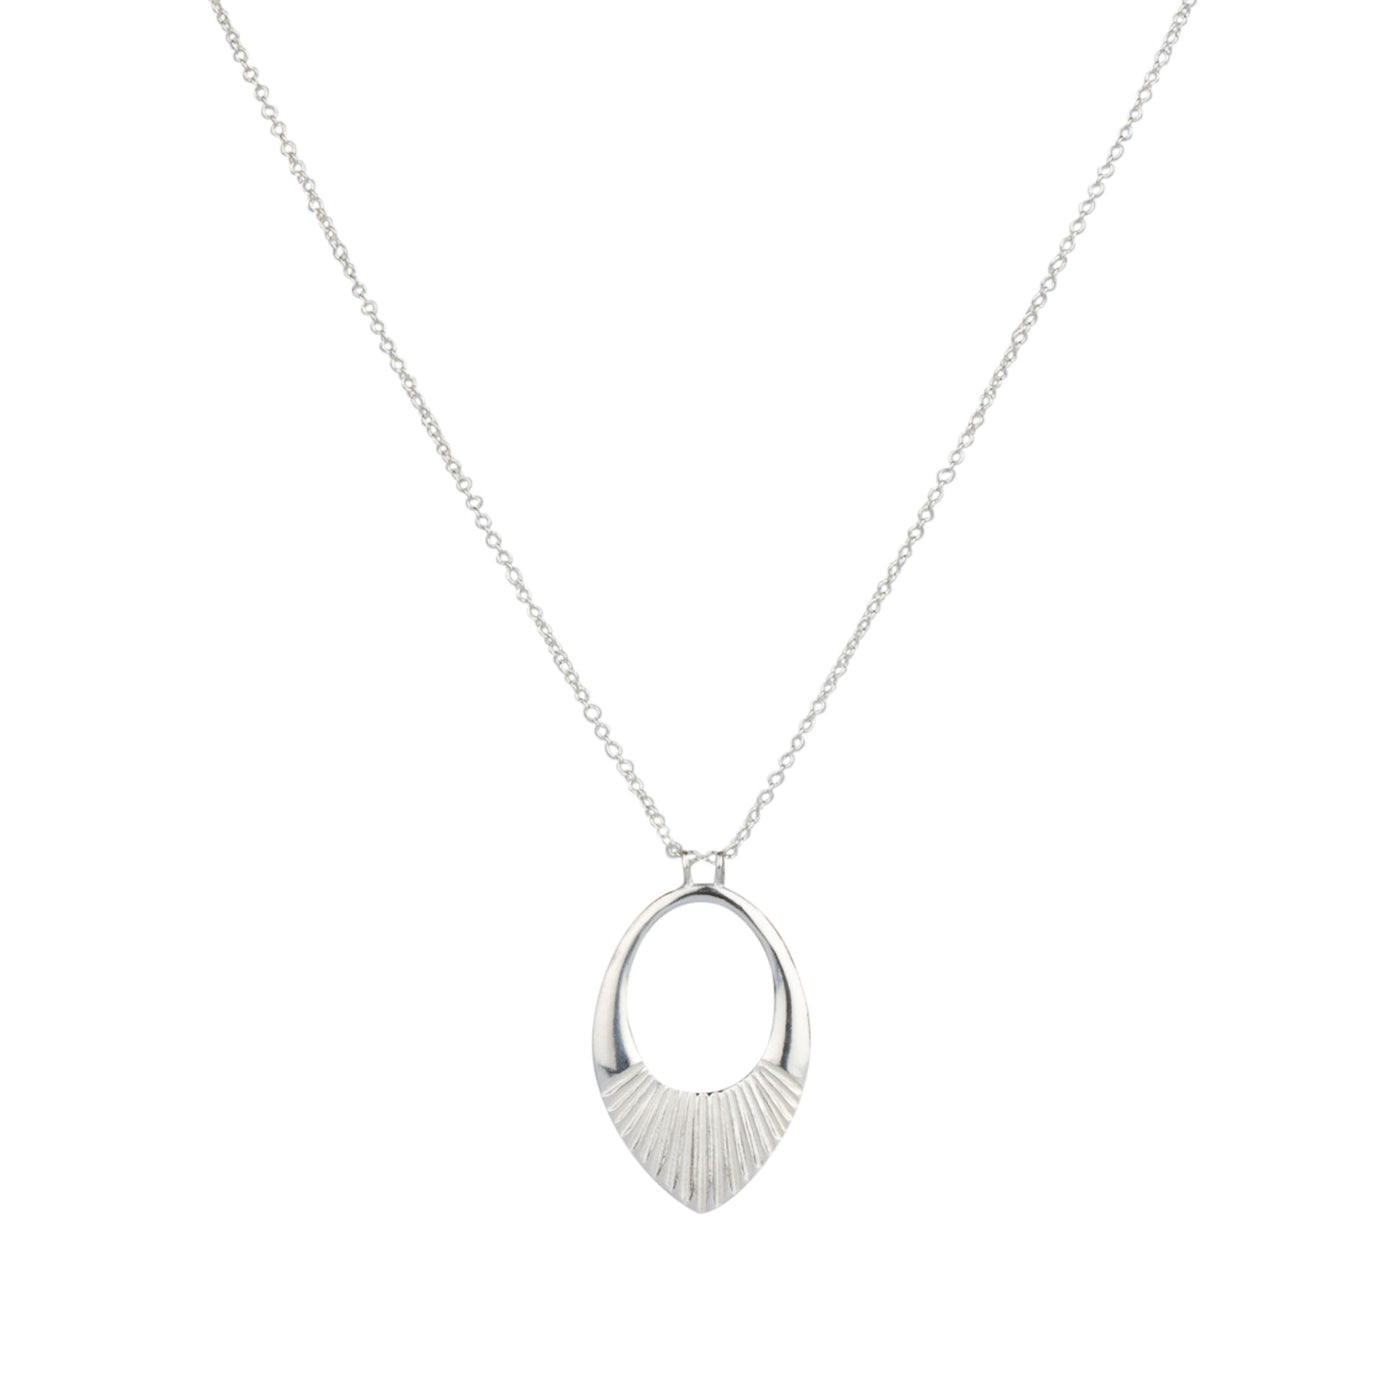 Silver medium open petal shape pendant with a textured bottom on a 22" silver chain on a white background